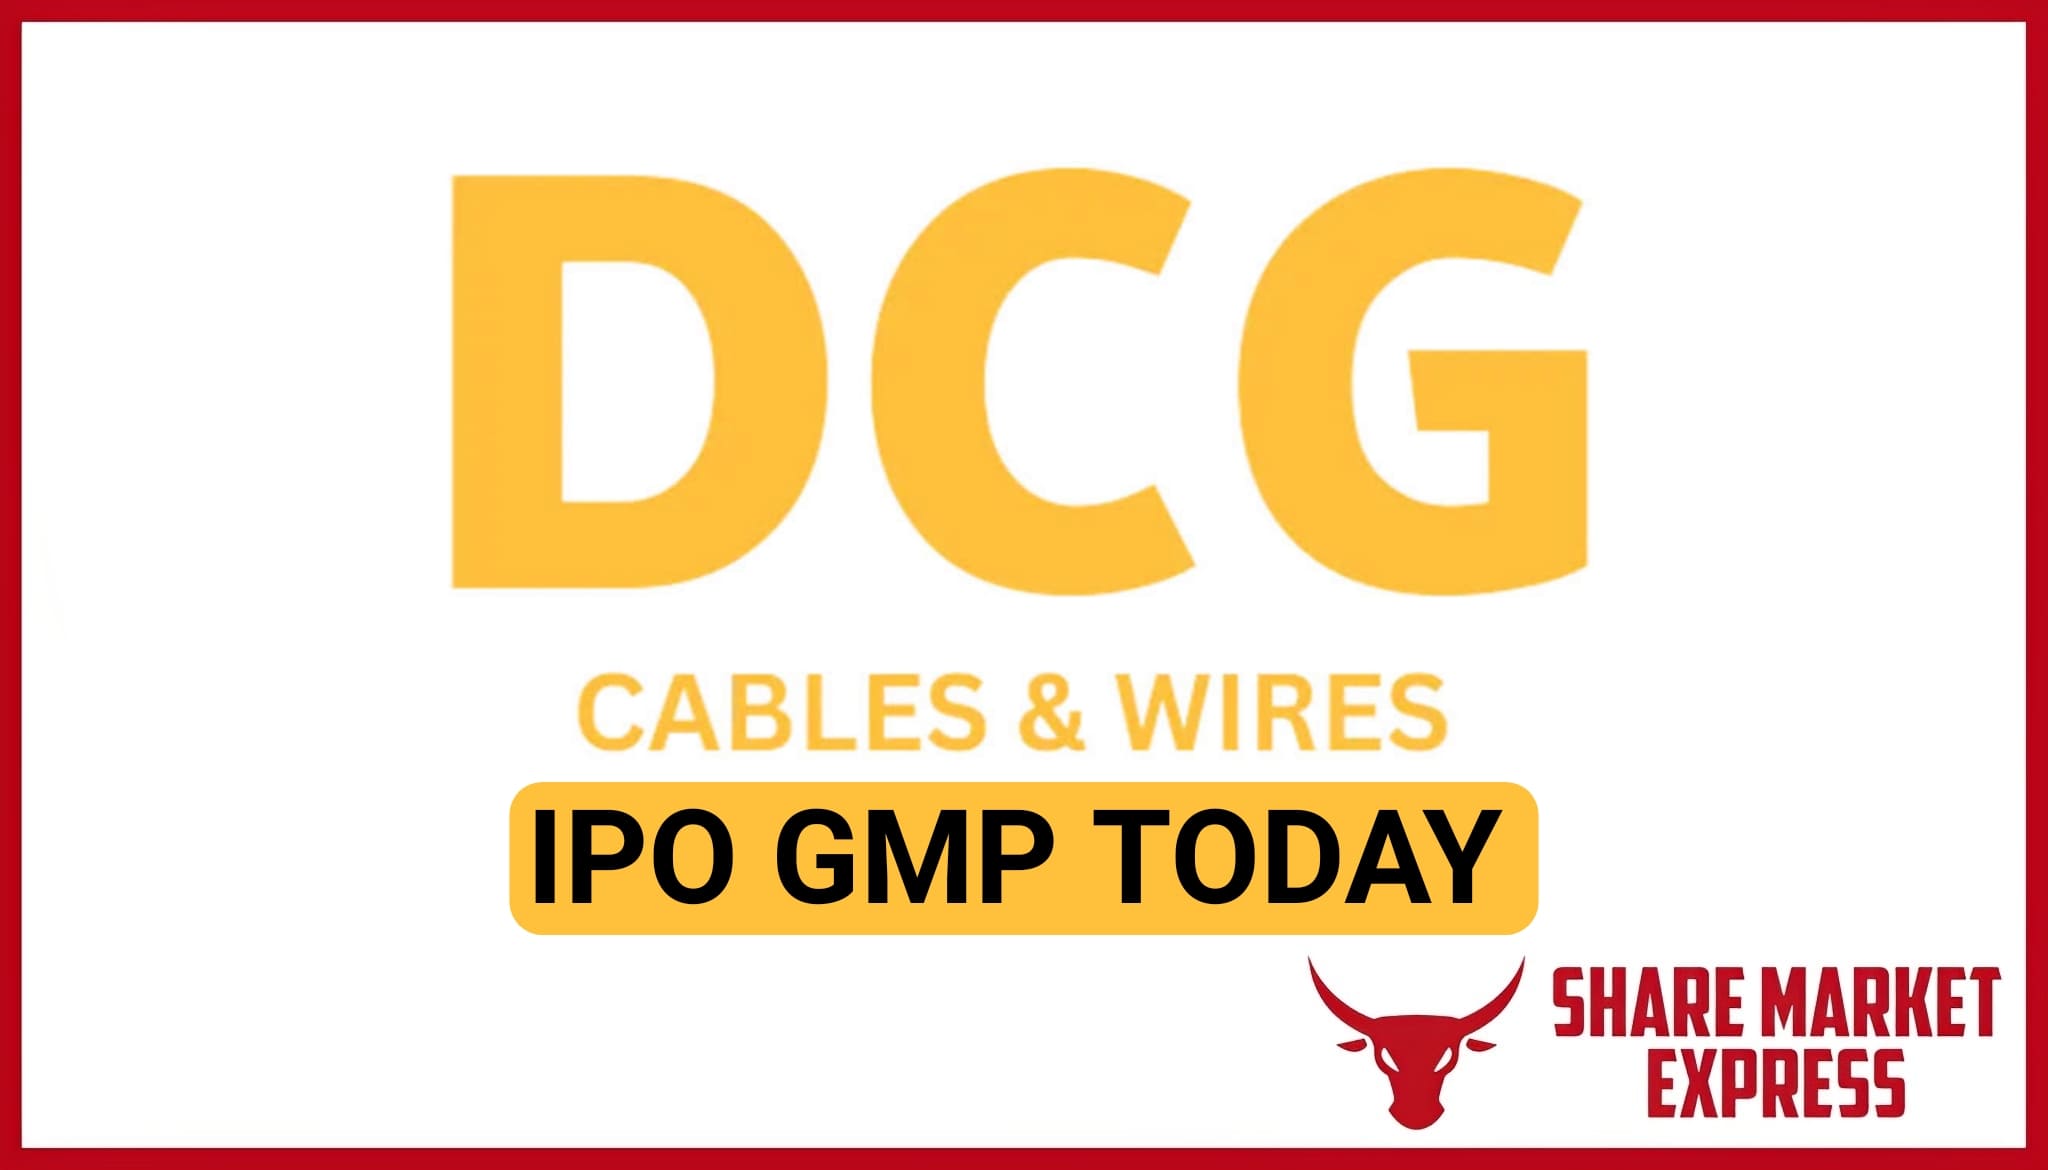 DCG Cables IPO GMP Today